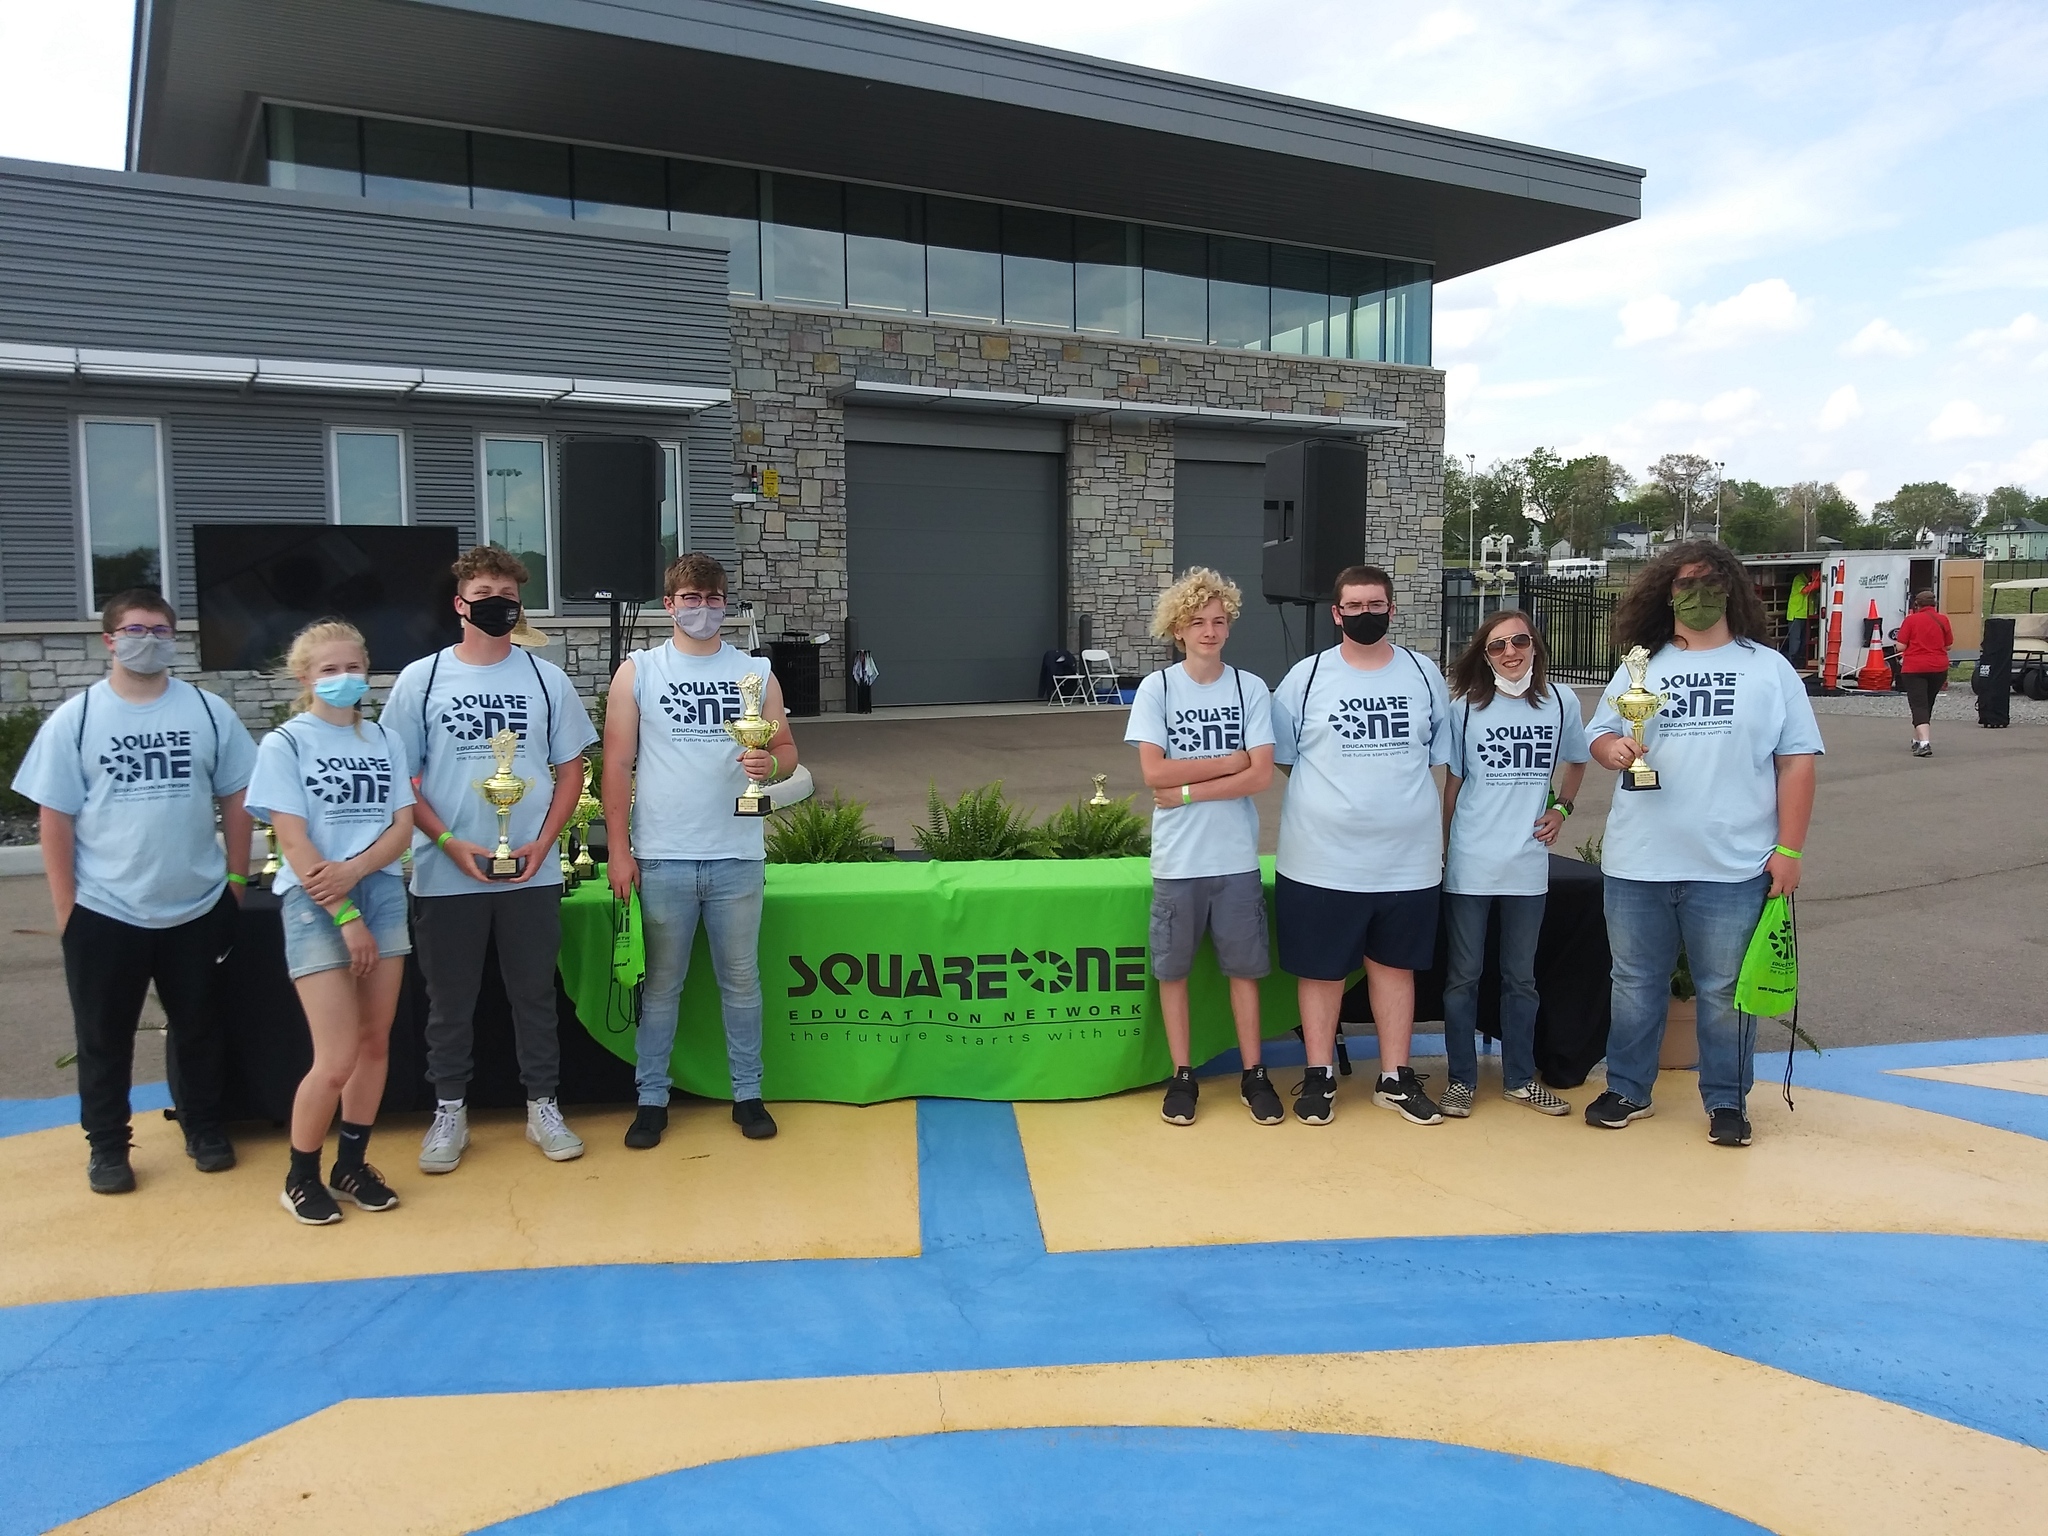 CAD students taking a group picture at the Square One electric car race.